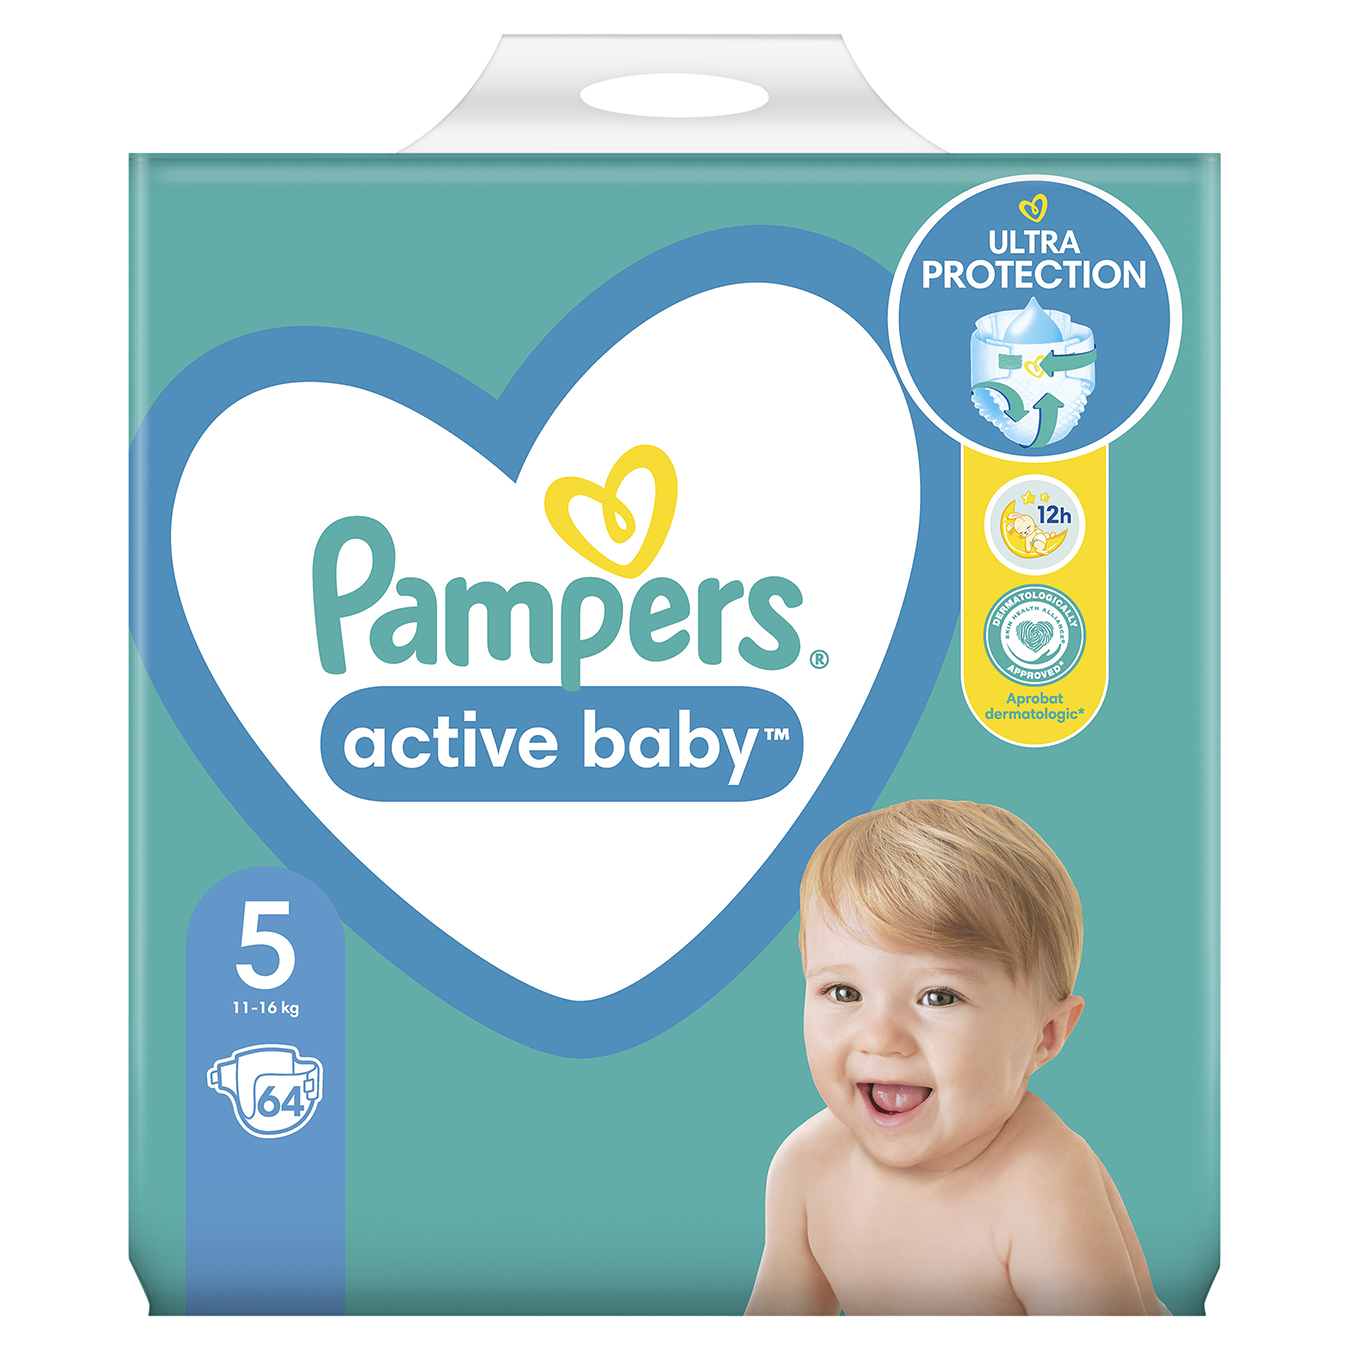 Diapers for children Pampers disposable Active Baby Junior (11-16 kg) giant 64